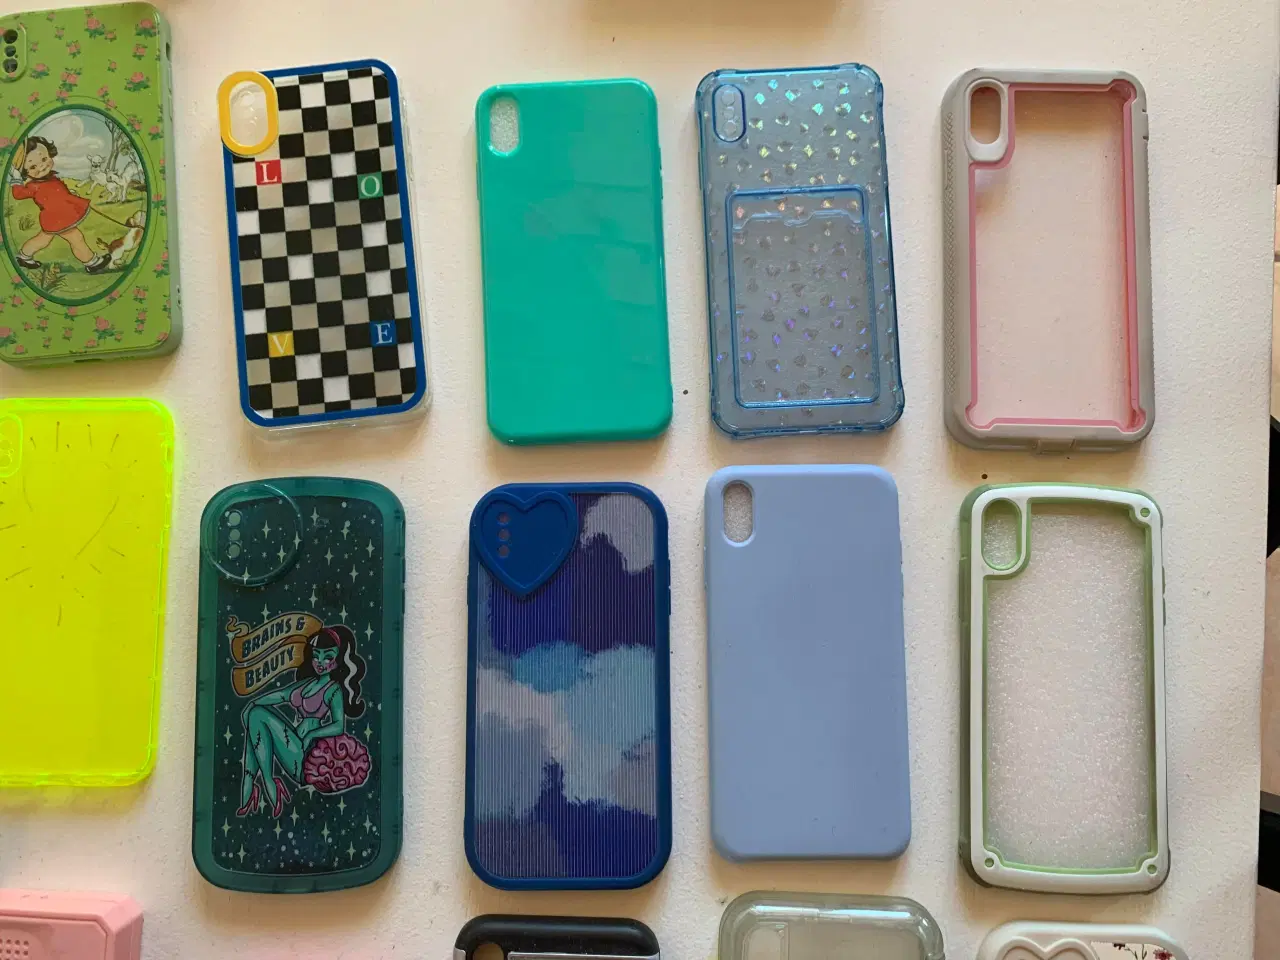 Billede 4 - Iphone xs Max covers